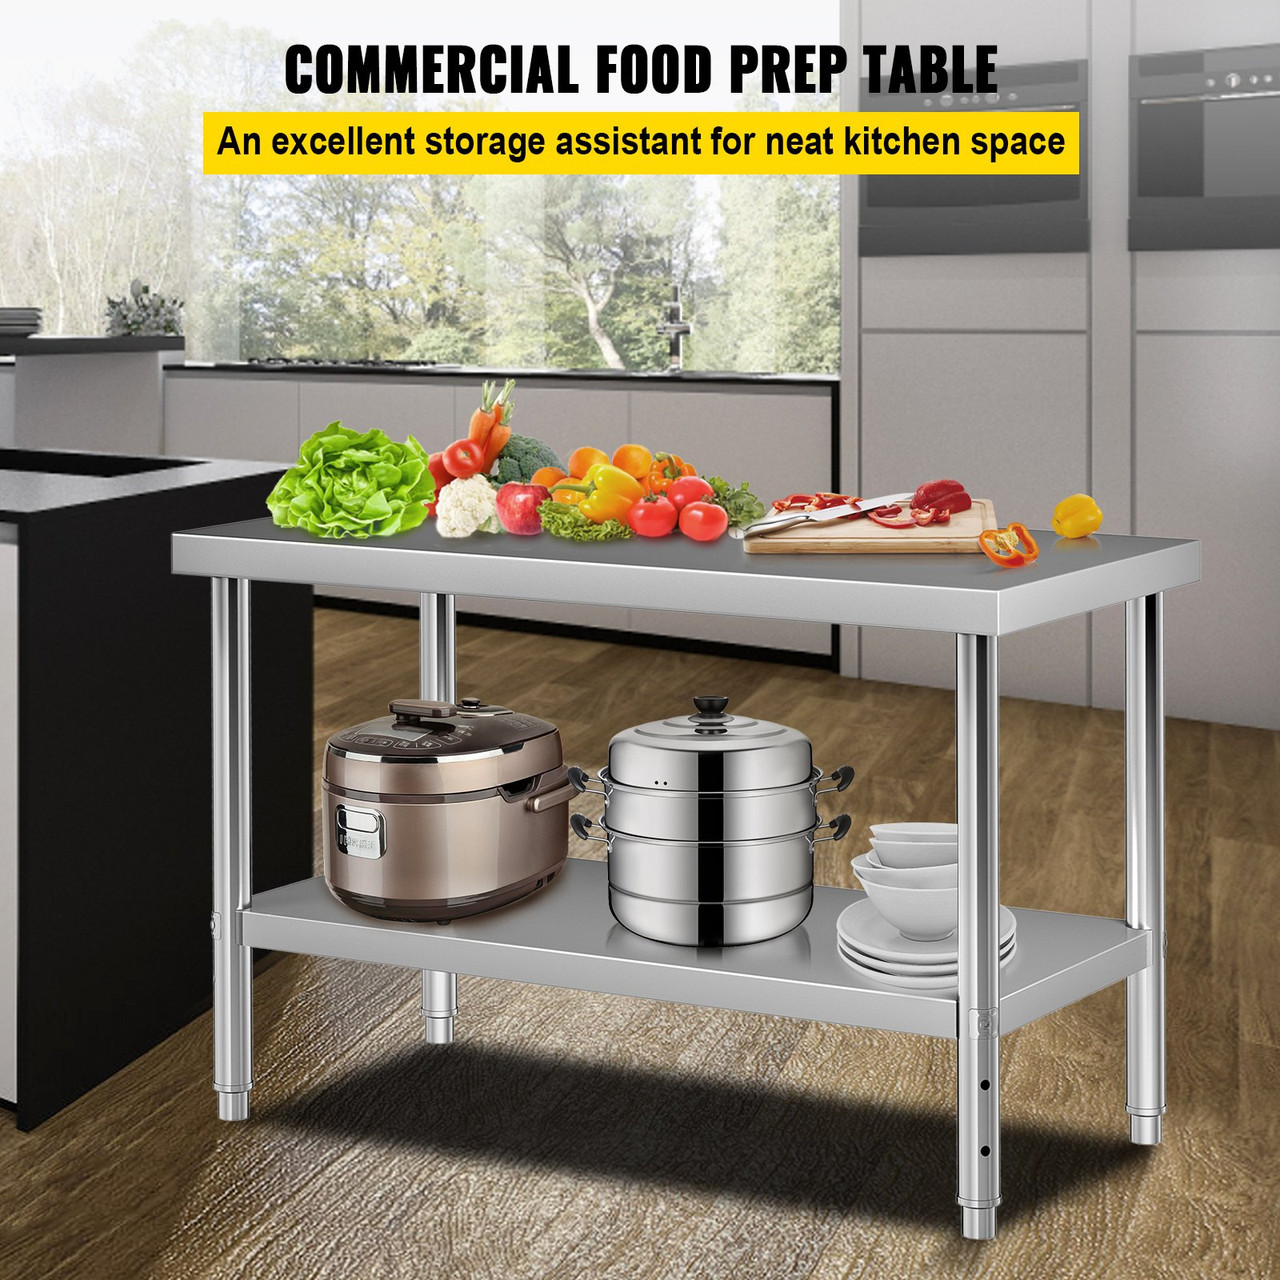 Stainless Steel Prep Table, 48 x 24 x 34 Inch, 550lbs Load Capacity Heavy Duty Metal Worktable with Adjustable Undershelf, Commercial Workstation for